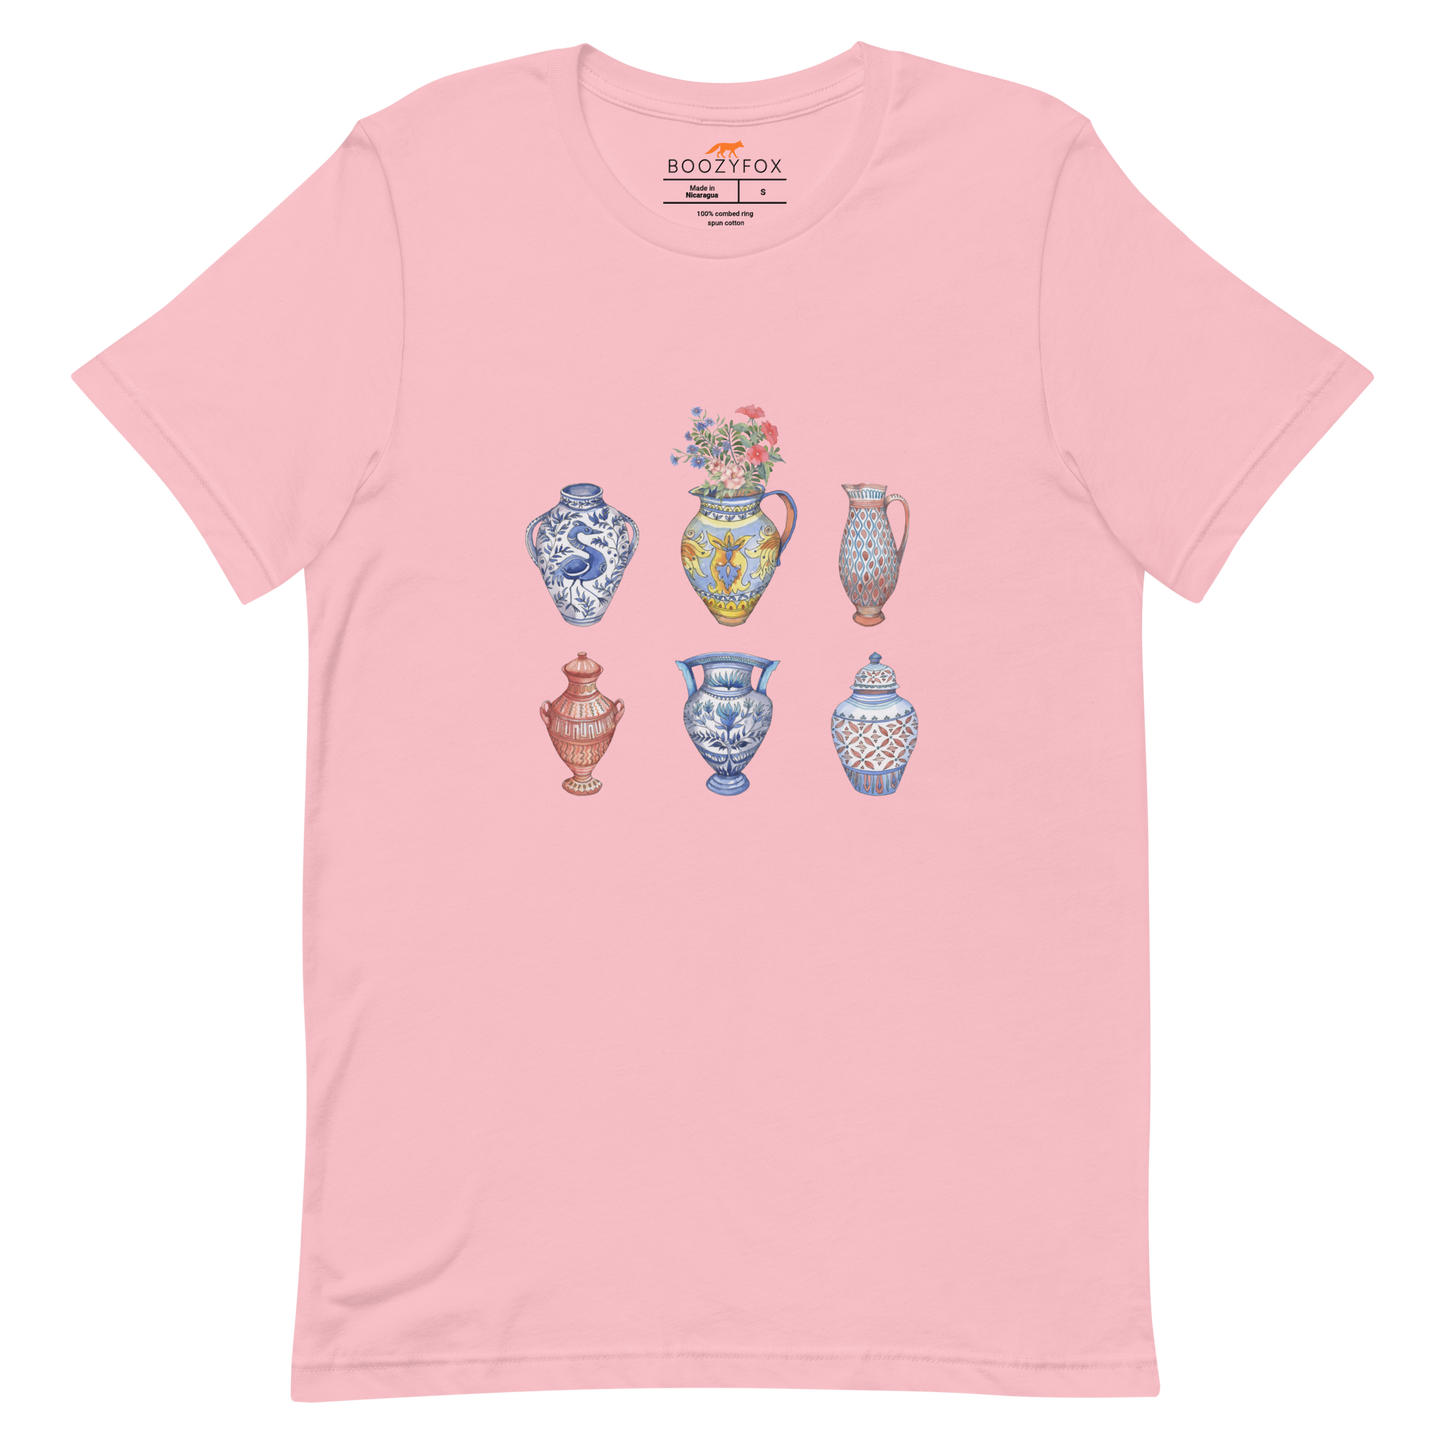 Pink Premium Vase Tee featuring a chic vase graphic on the chest - Artsy Graphic Vase Tees - Boozy Fox